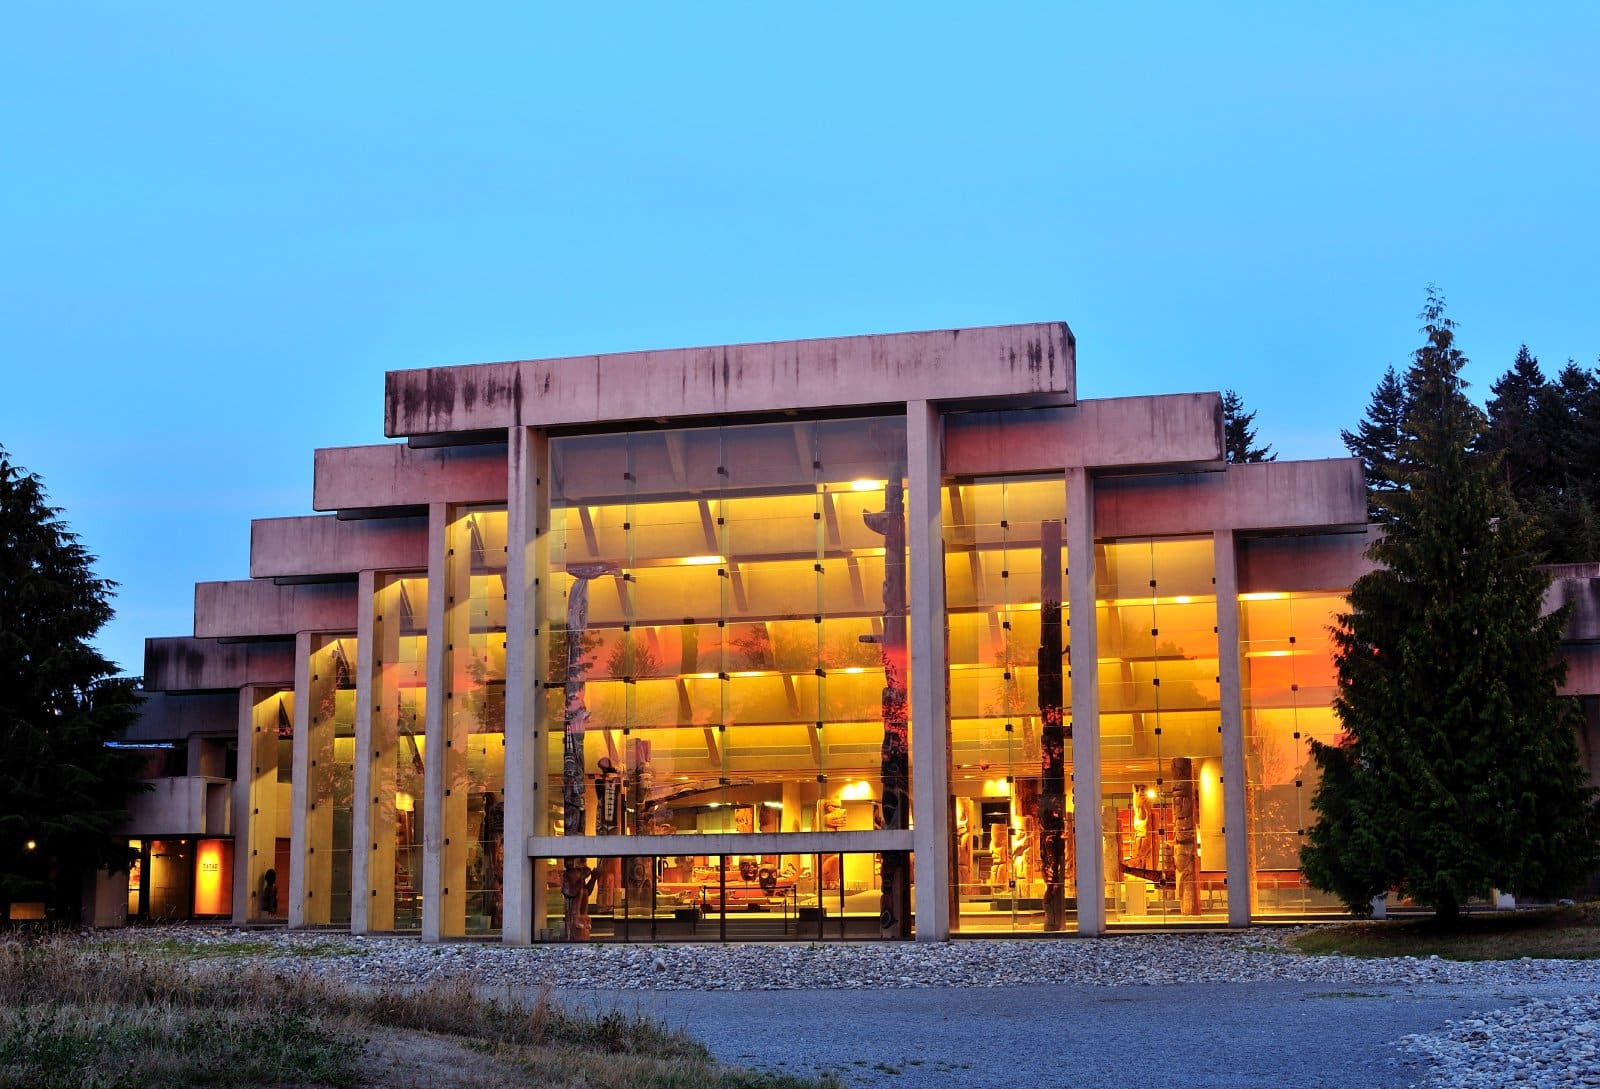 <p class="wp-caption-text">Image Credit: Shutterstock / Xuanlu Wang</p>  <p><span>Located on the University of British Columbia campus, the Museum of Anthropology is renowned for its collections of First Nations and indigenous cultures around the world. With its striking architecture inspired by Northwest Coast First Nations post-and-beam structures, the museum offers an insight into the region’s rich cultural heritage through artifacts, totem poles, and the acclaimed Great Hall.</span></p>